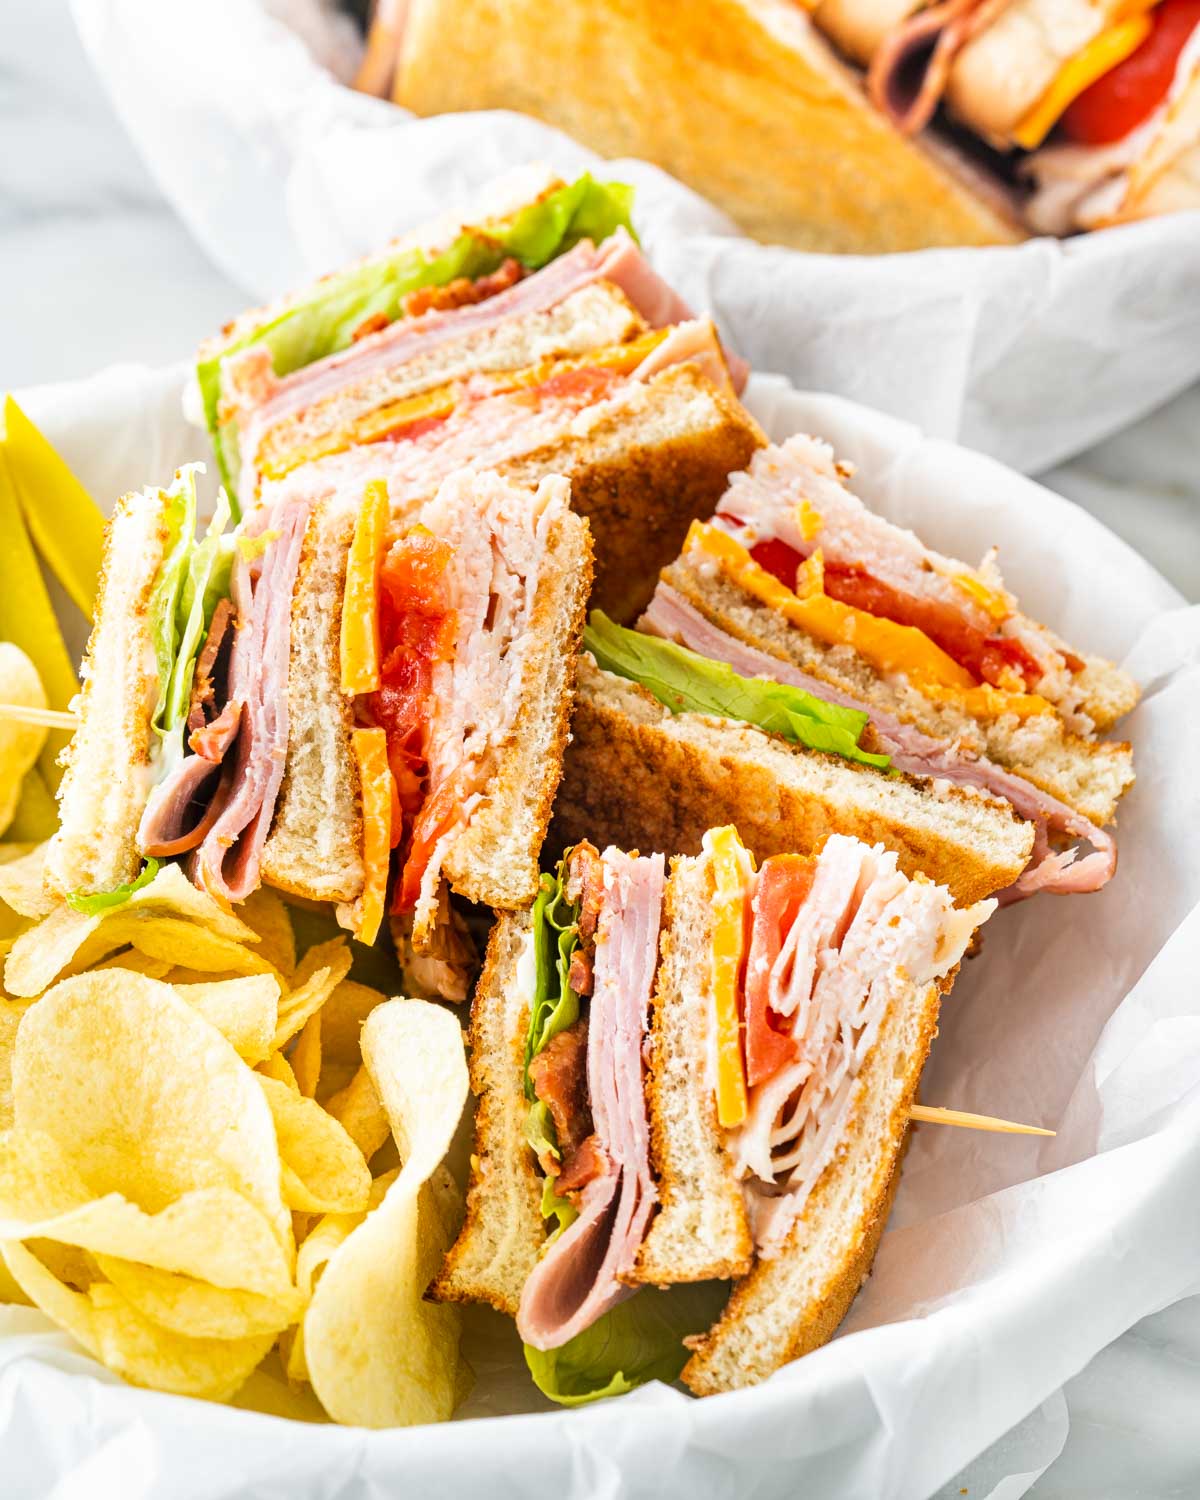 club sandwich cut in quarters with a side of chips and pickles in a basket.